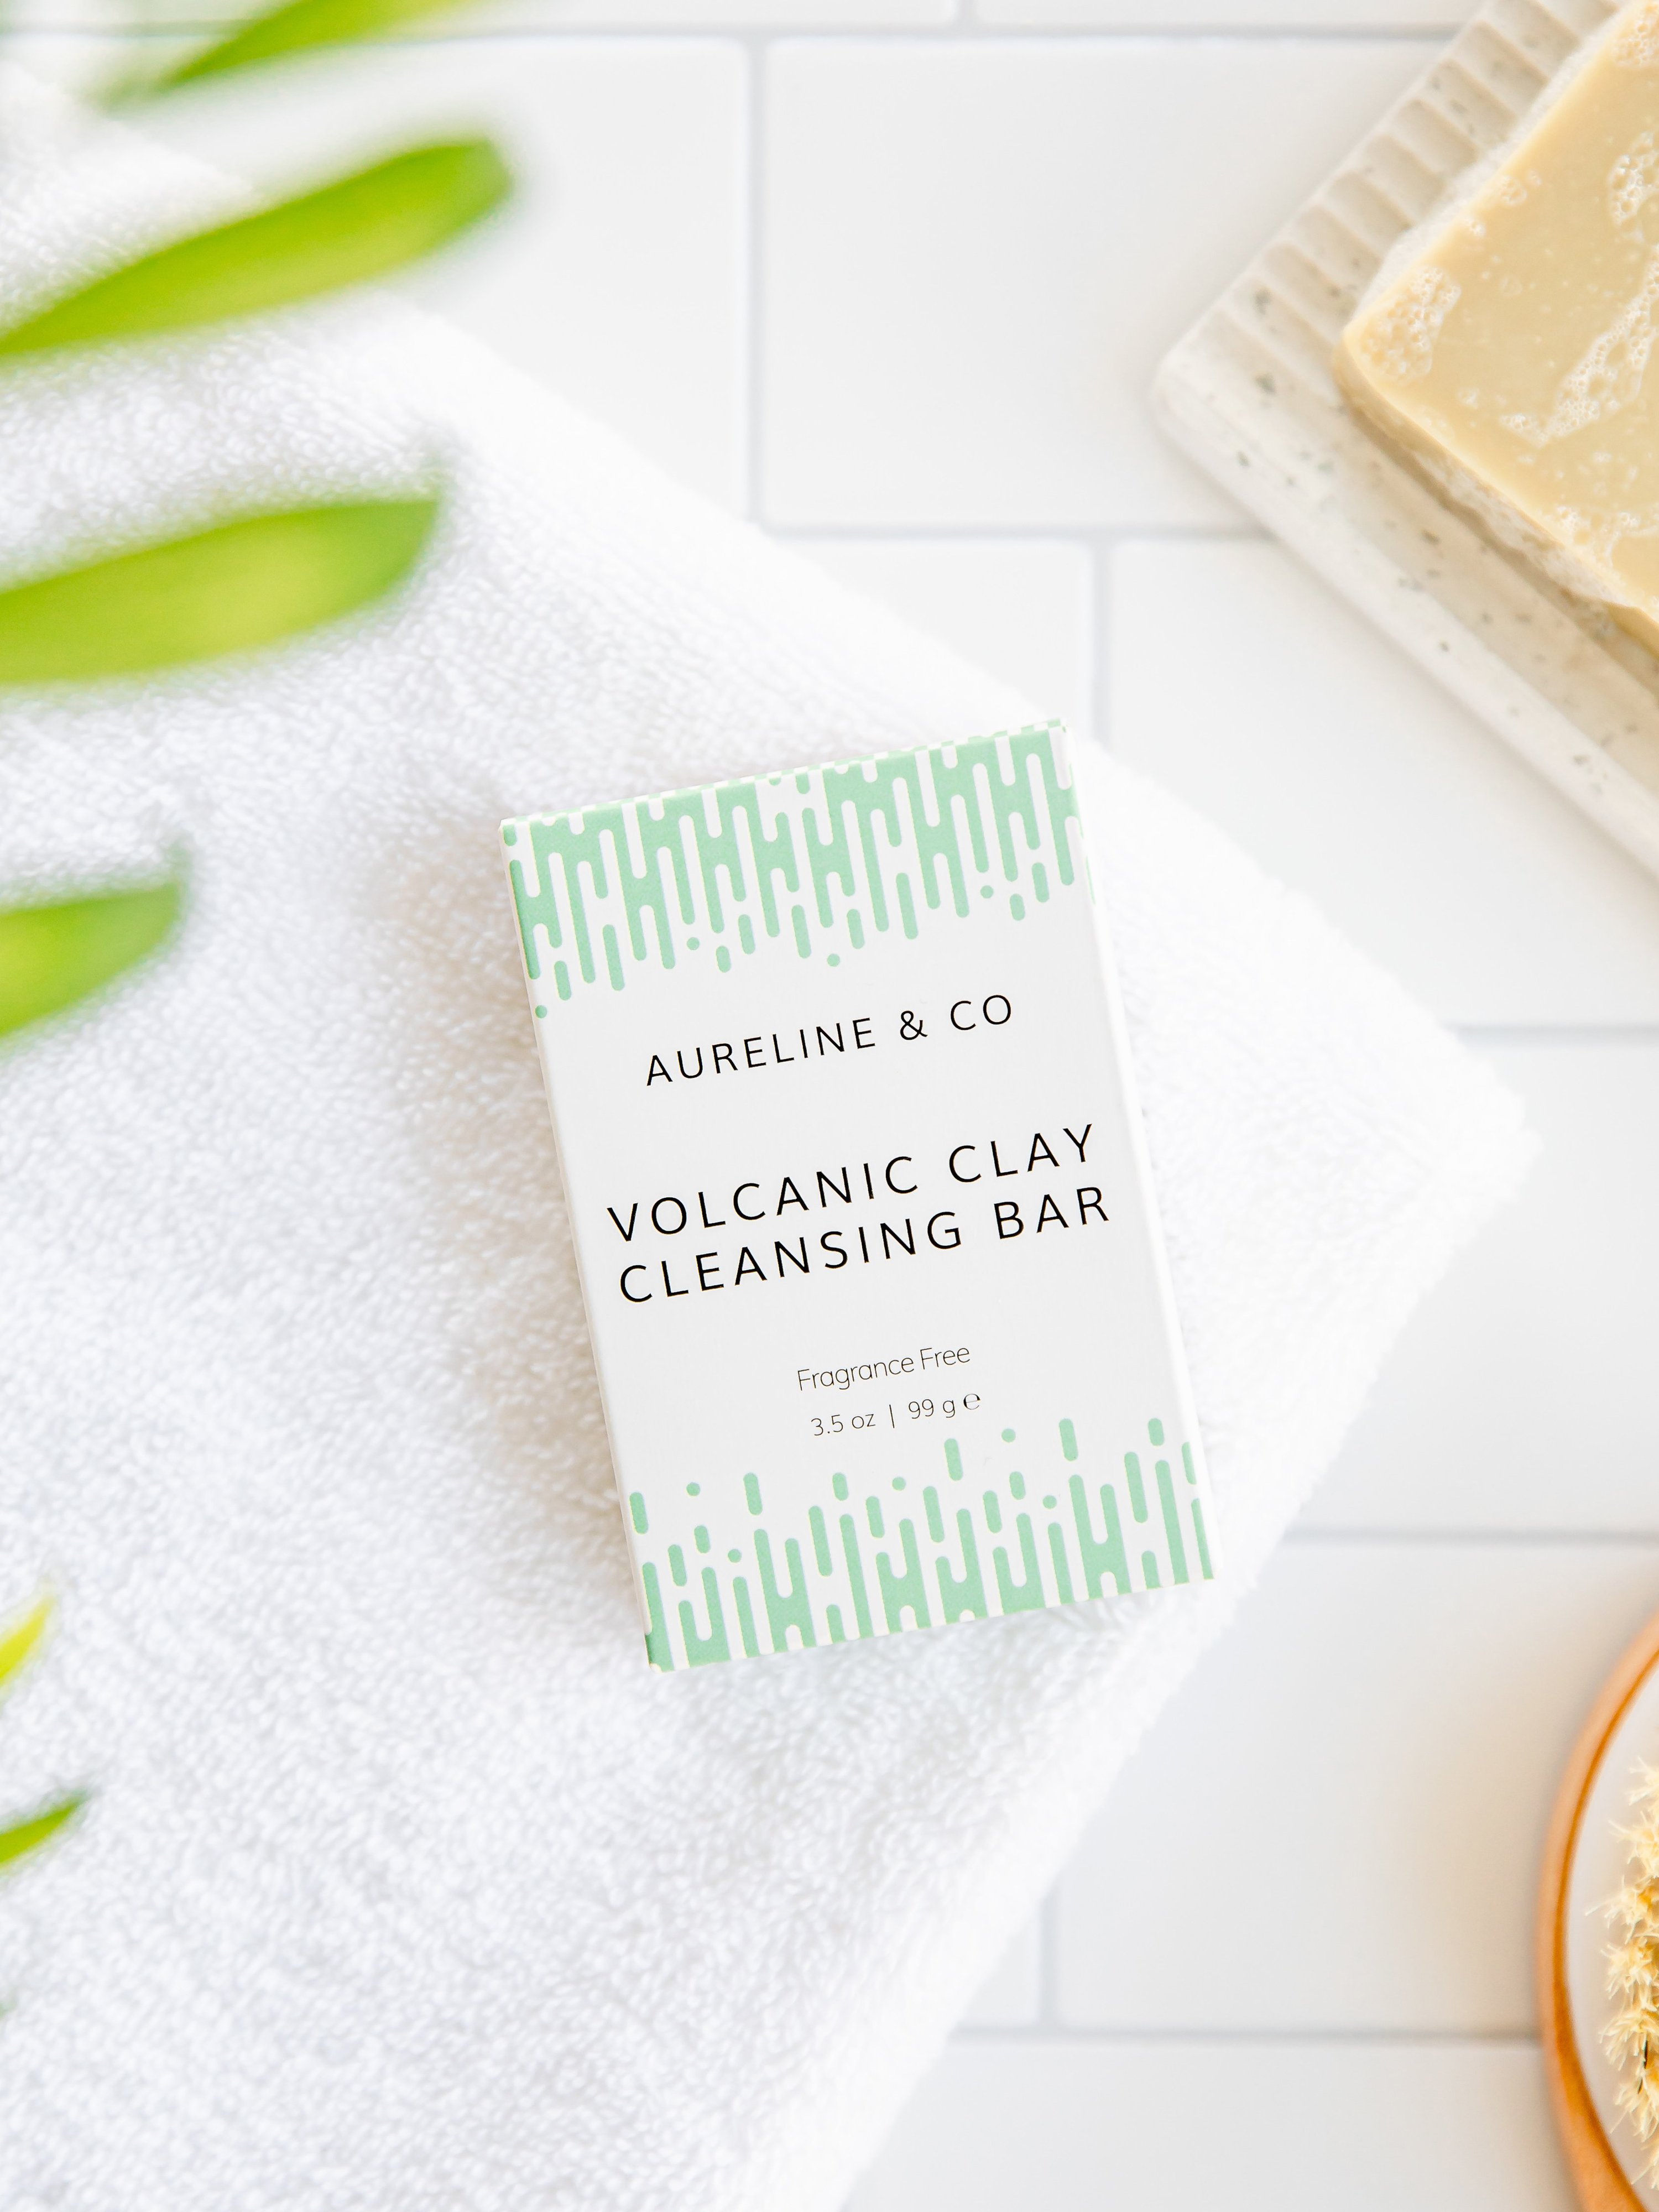 Aureline & Co Volcanic Clay Cleansing Bar